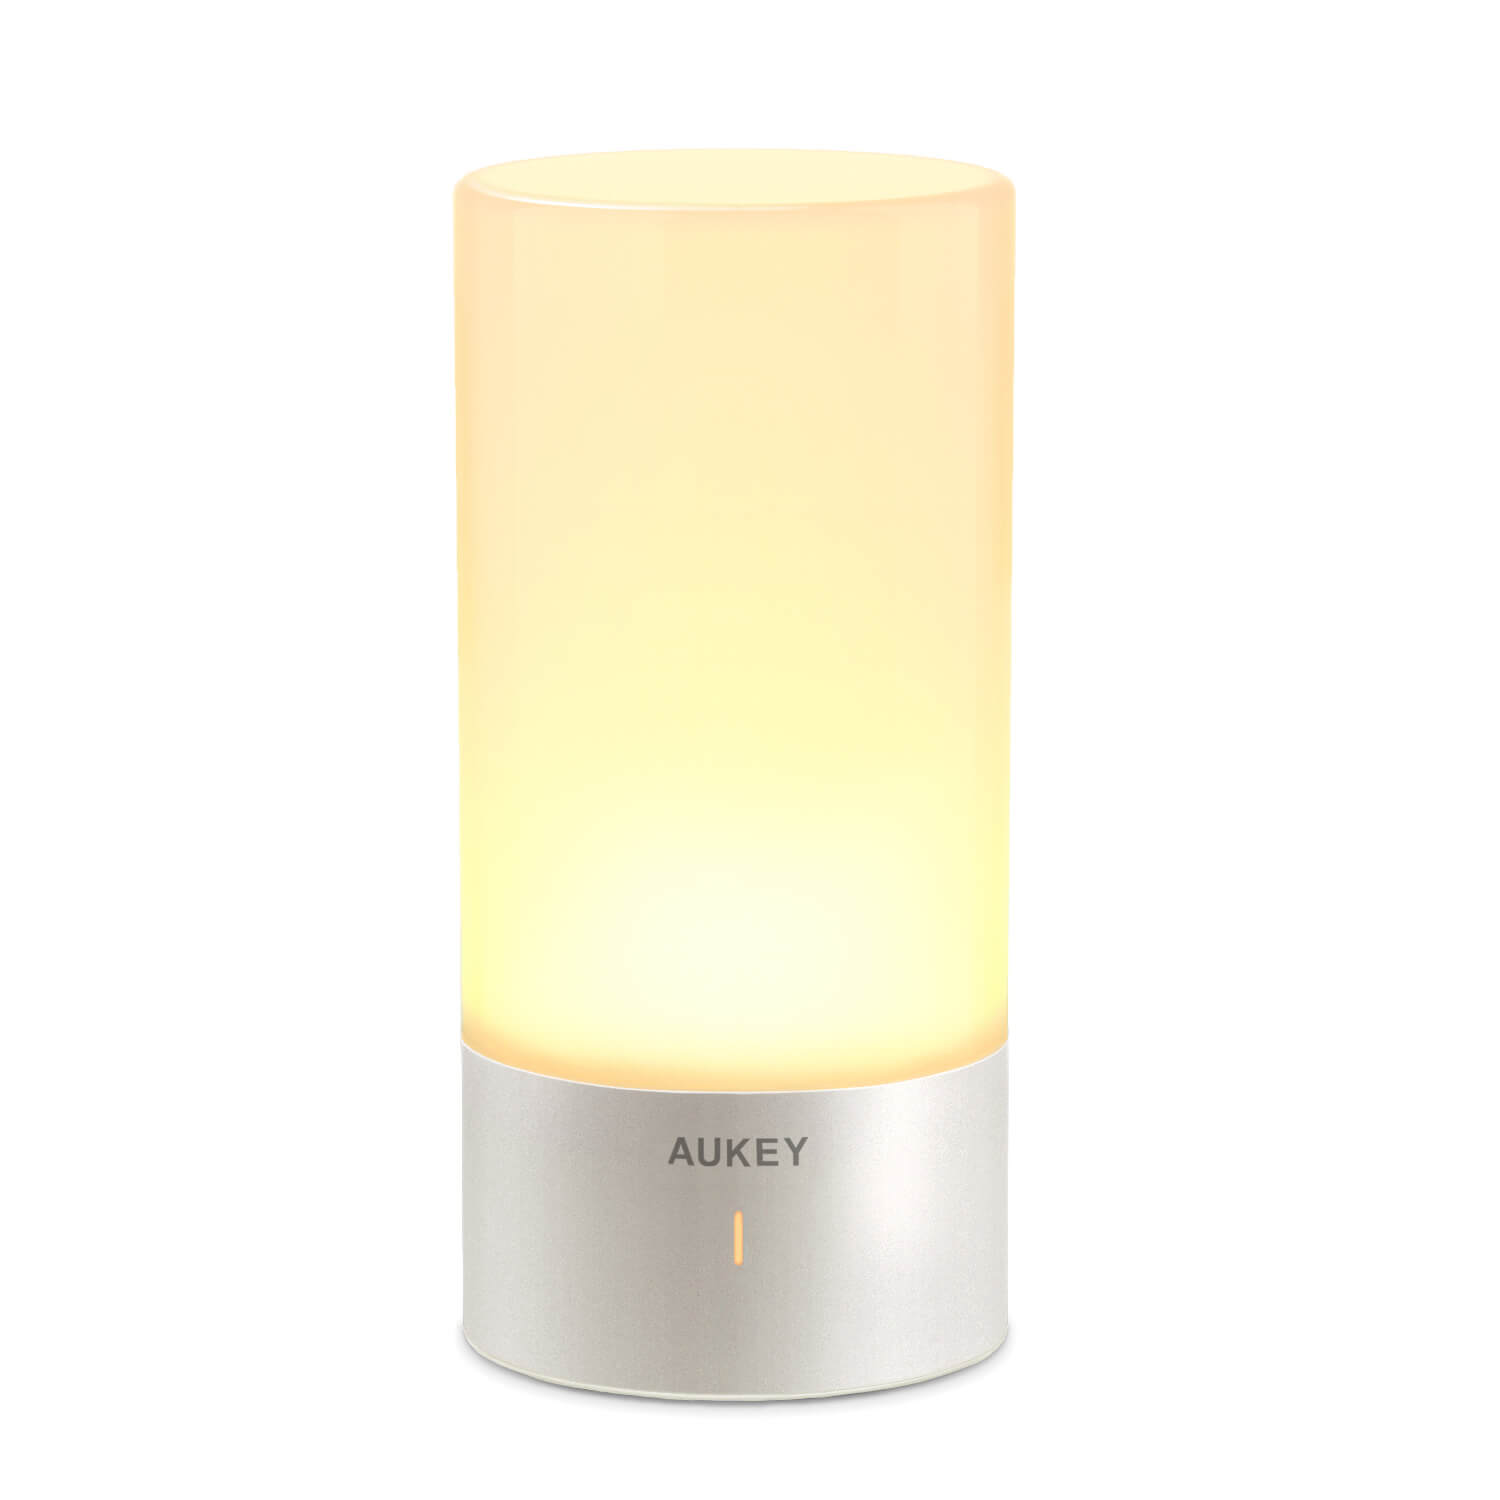 AUKEY | Touch Control RGB Lamp | LT-T6